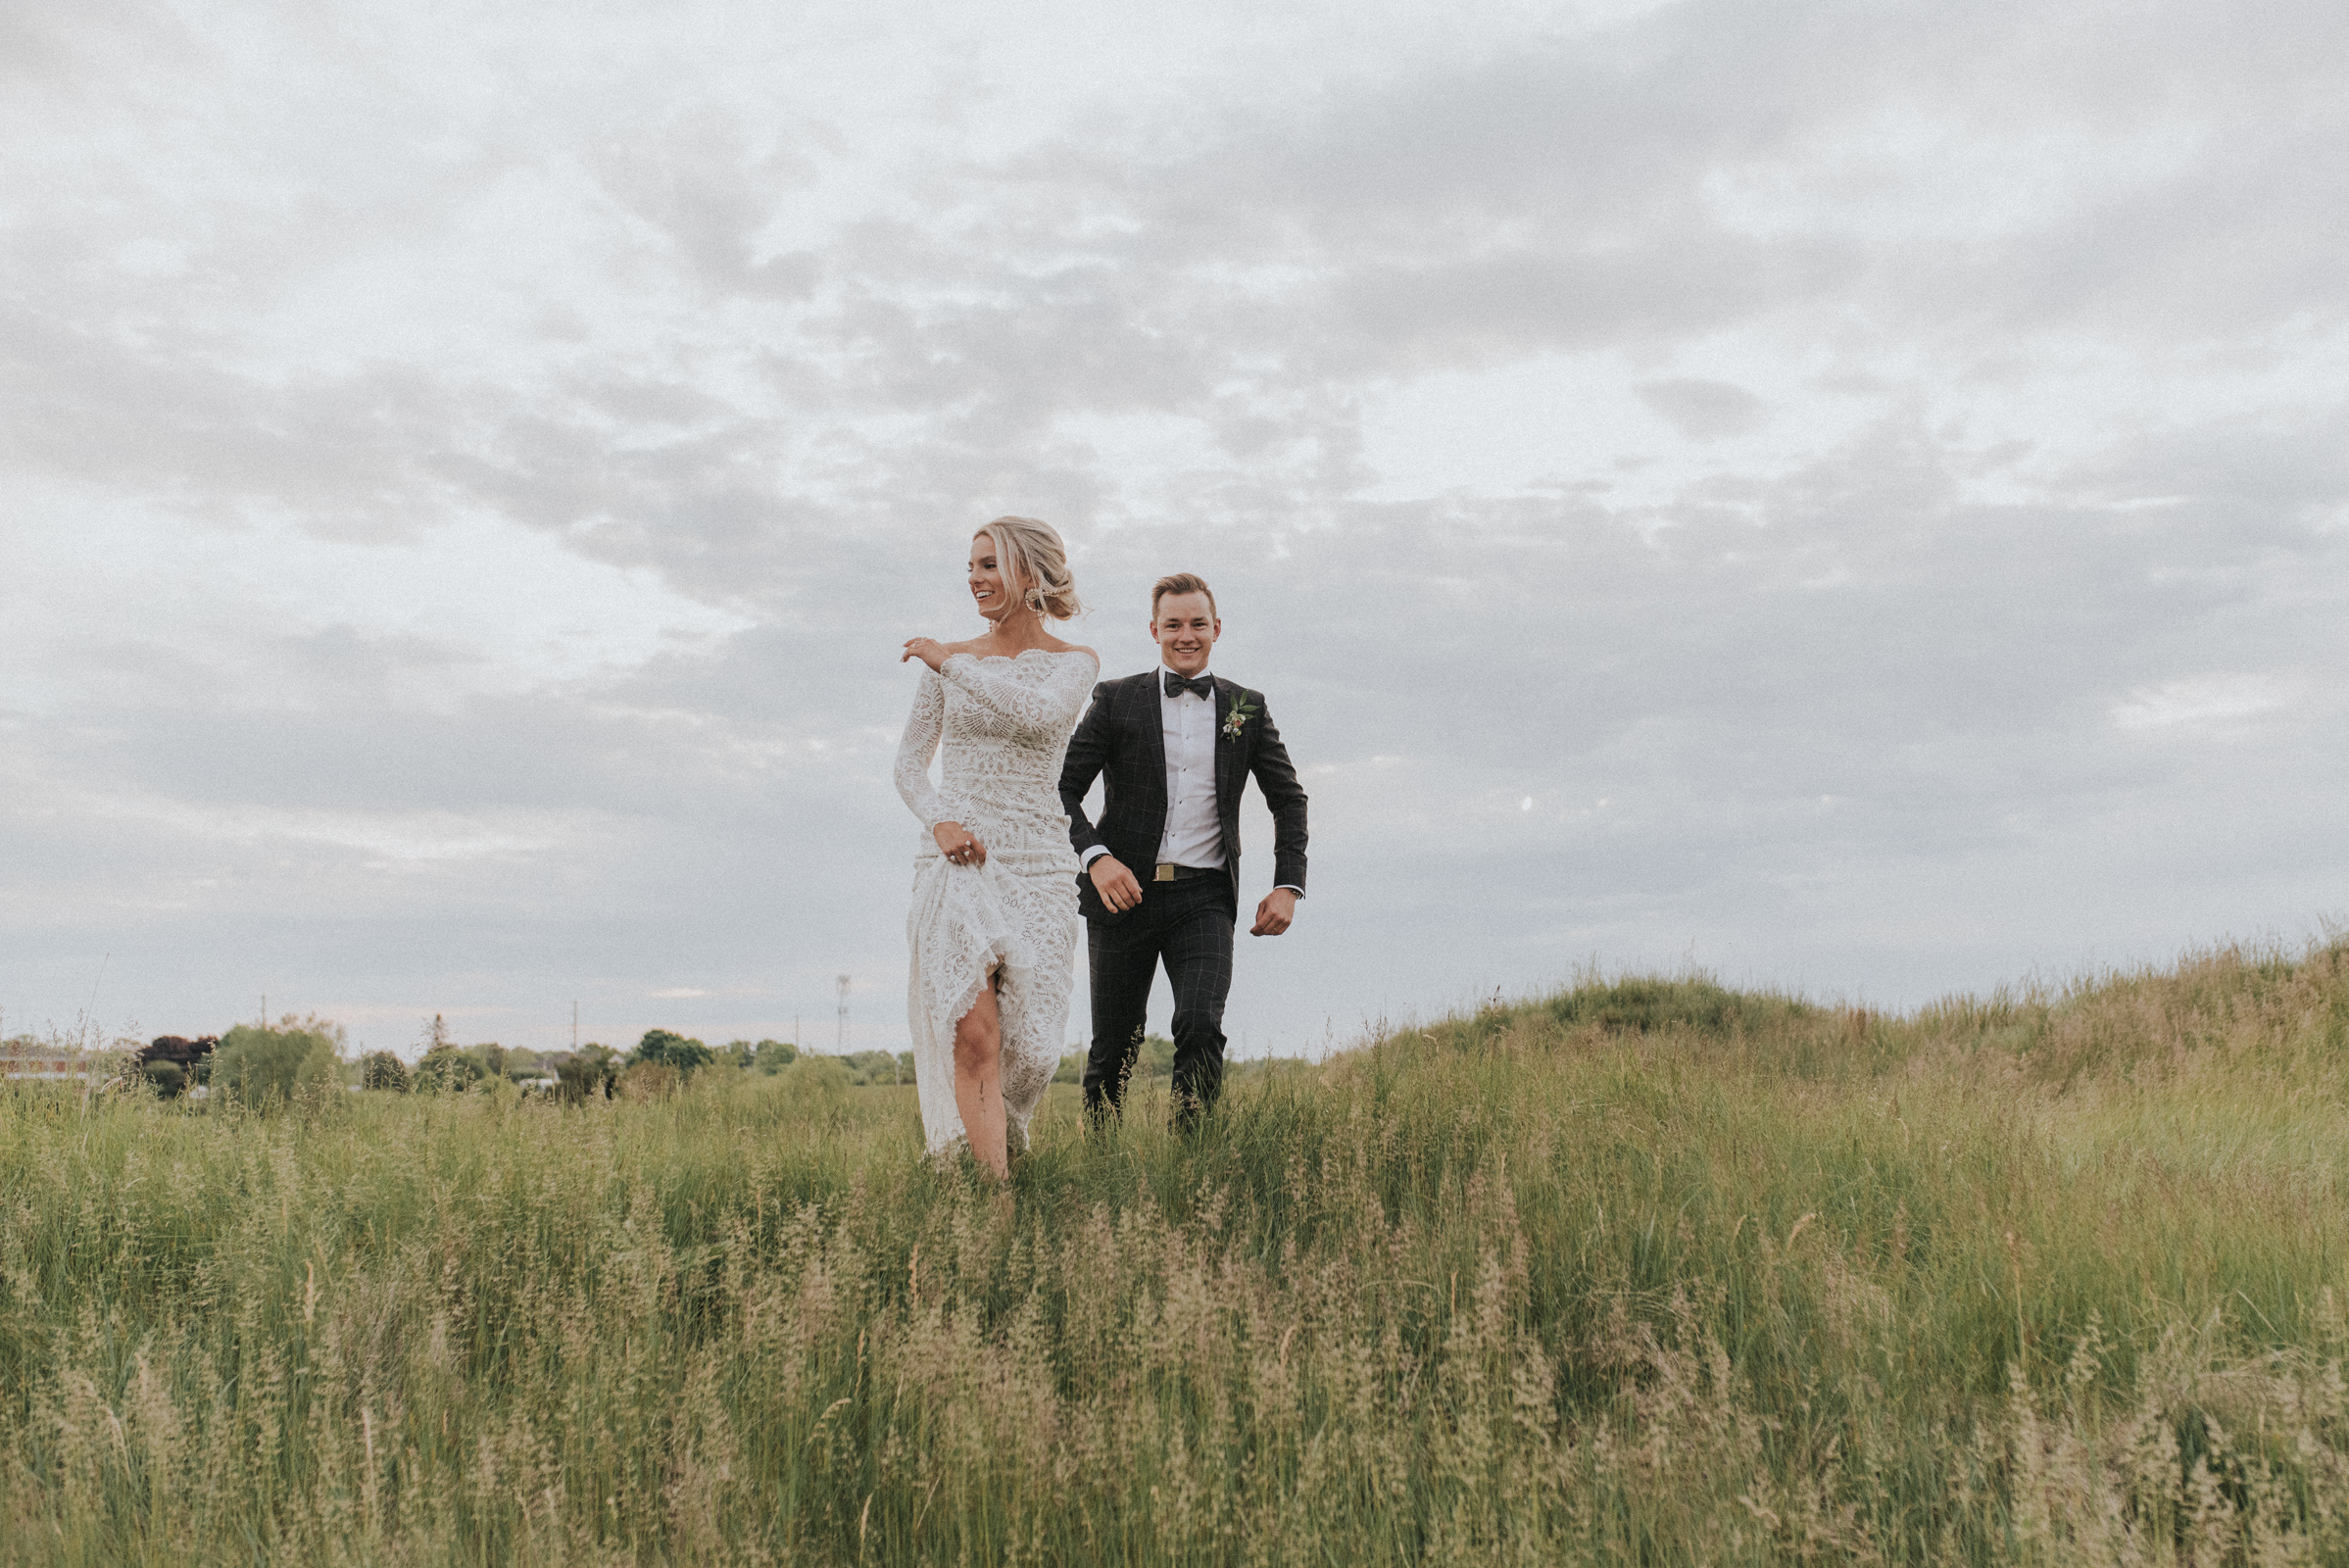 Spring Wedding at Piper's Heath Golf Club with Bride and Groom running through the tall grass.